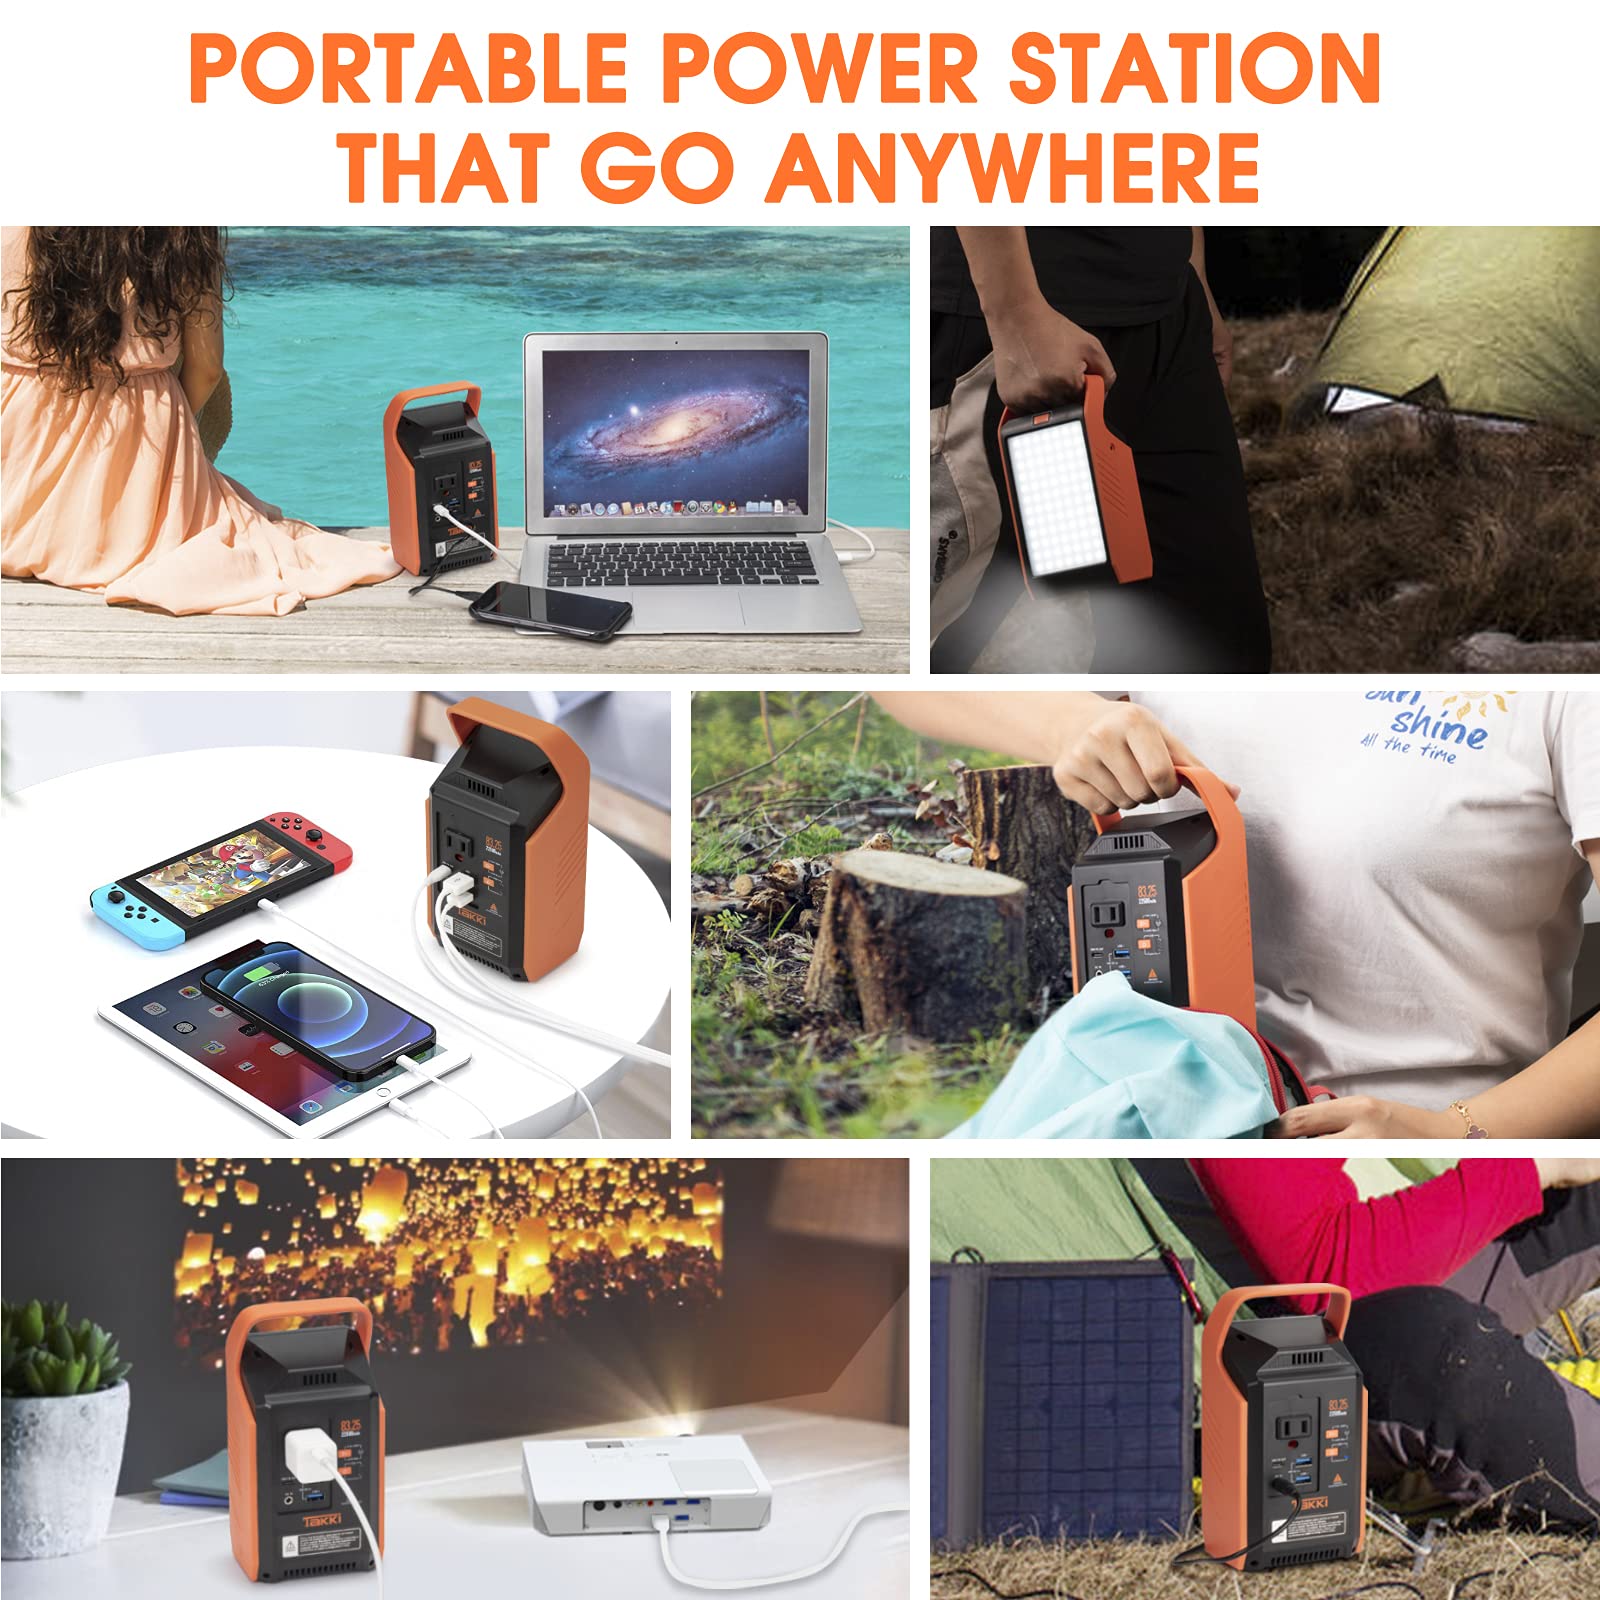 Takki Portable Camping Power Station with Camping Lantern, 22500mAh Solar Generator with Peak 120W/110V AC Outlet USB Port, Laptop Charger Power Supply for Camping Home Emergency…